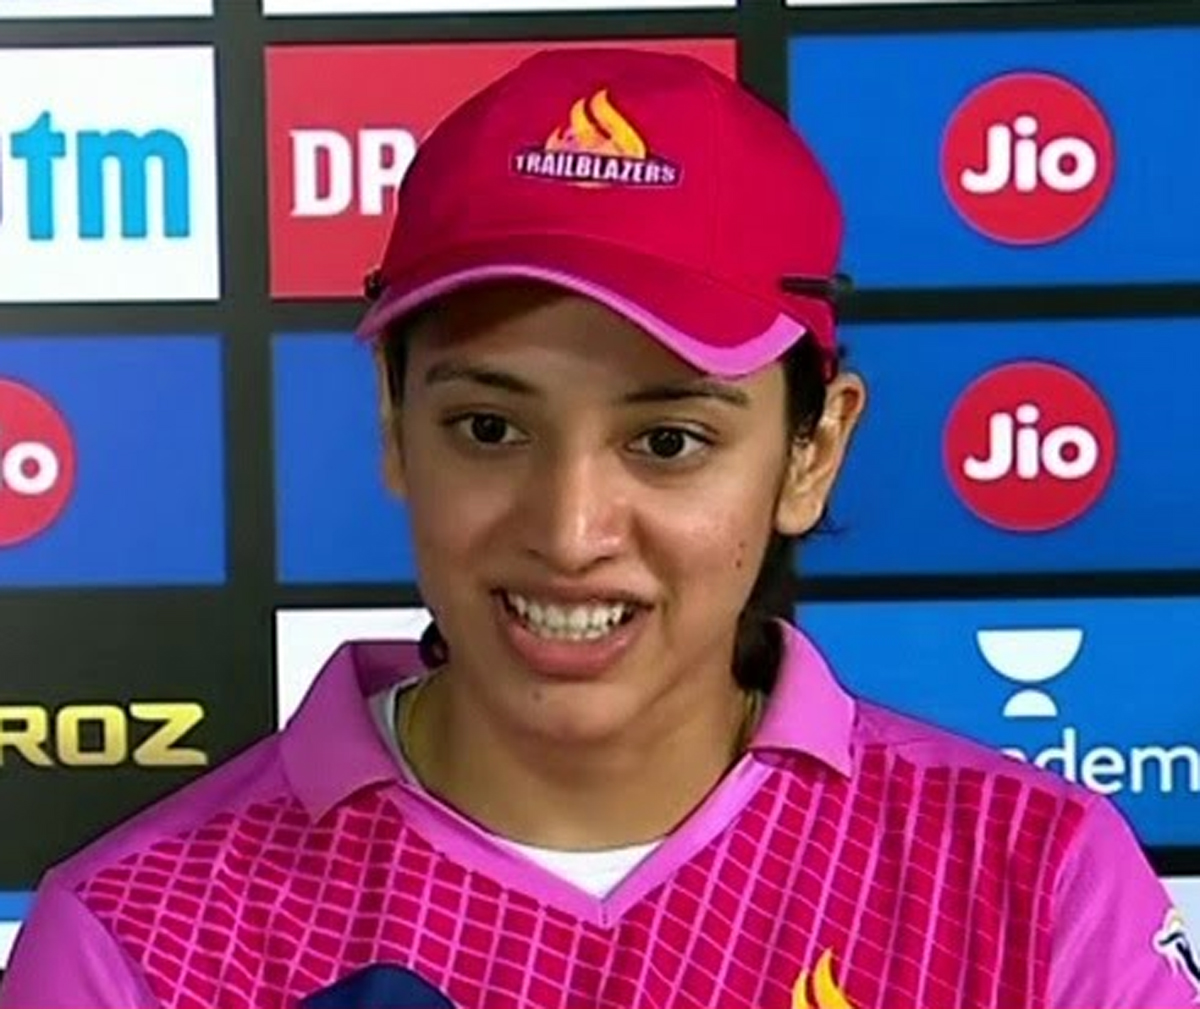 Watch how Smriti Mandhana's reacted to the journalist's awkward question !